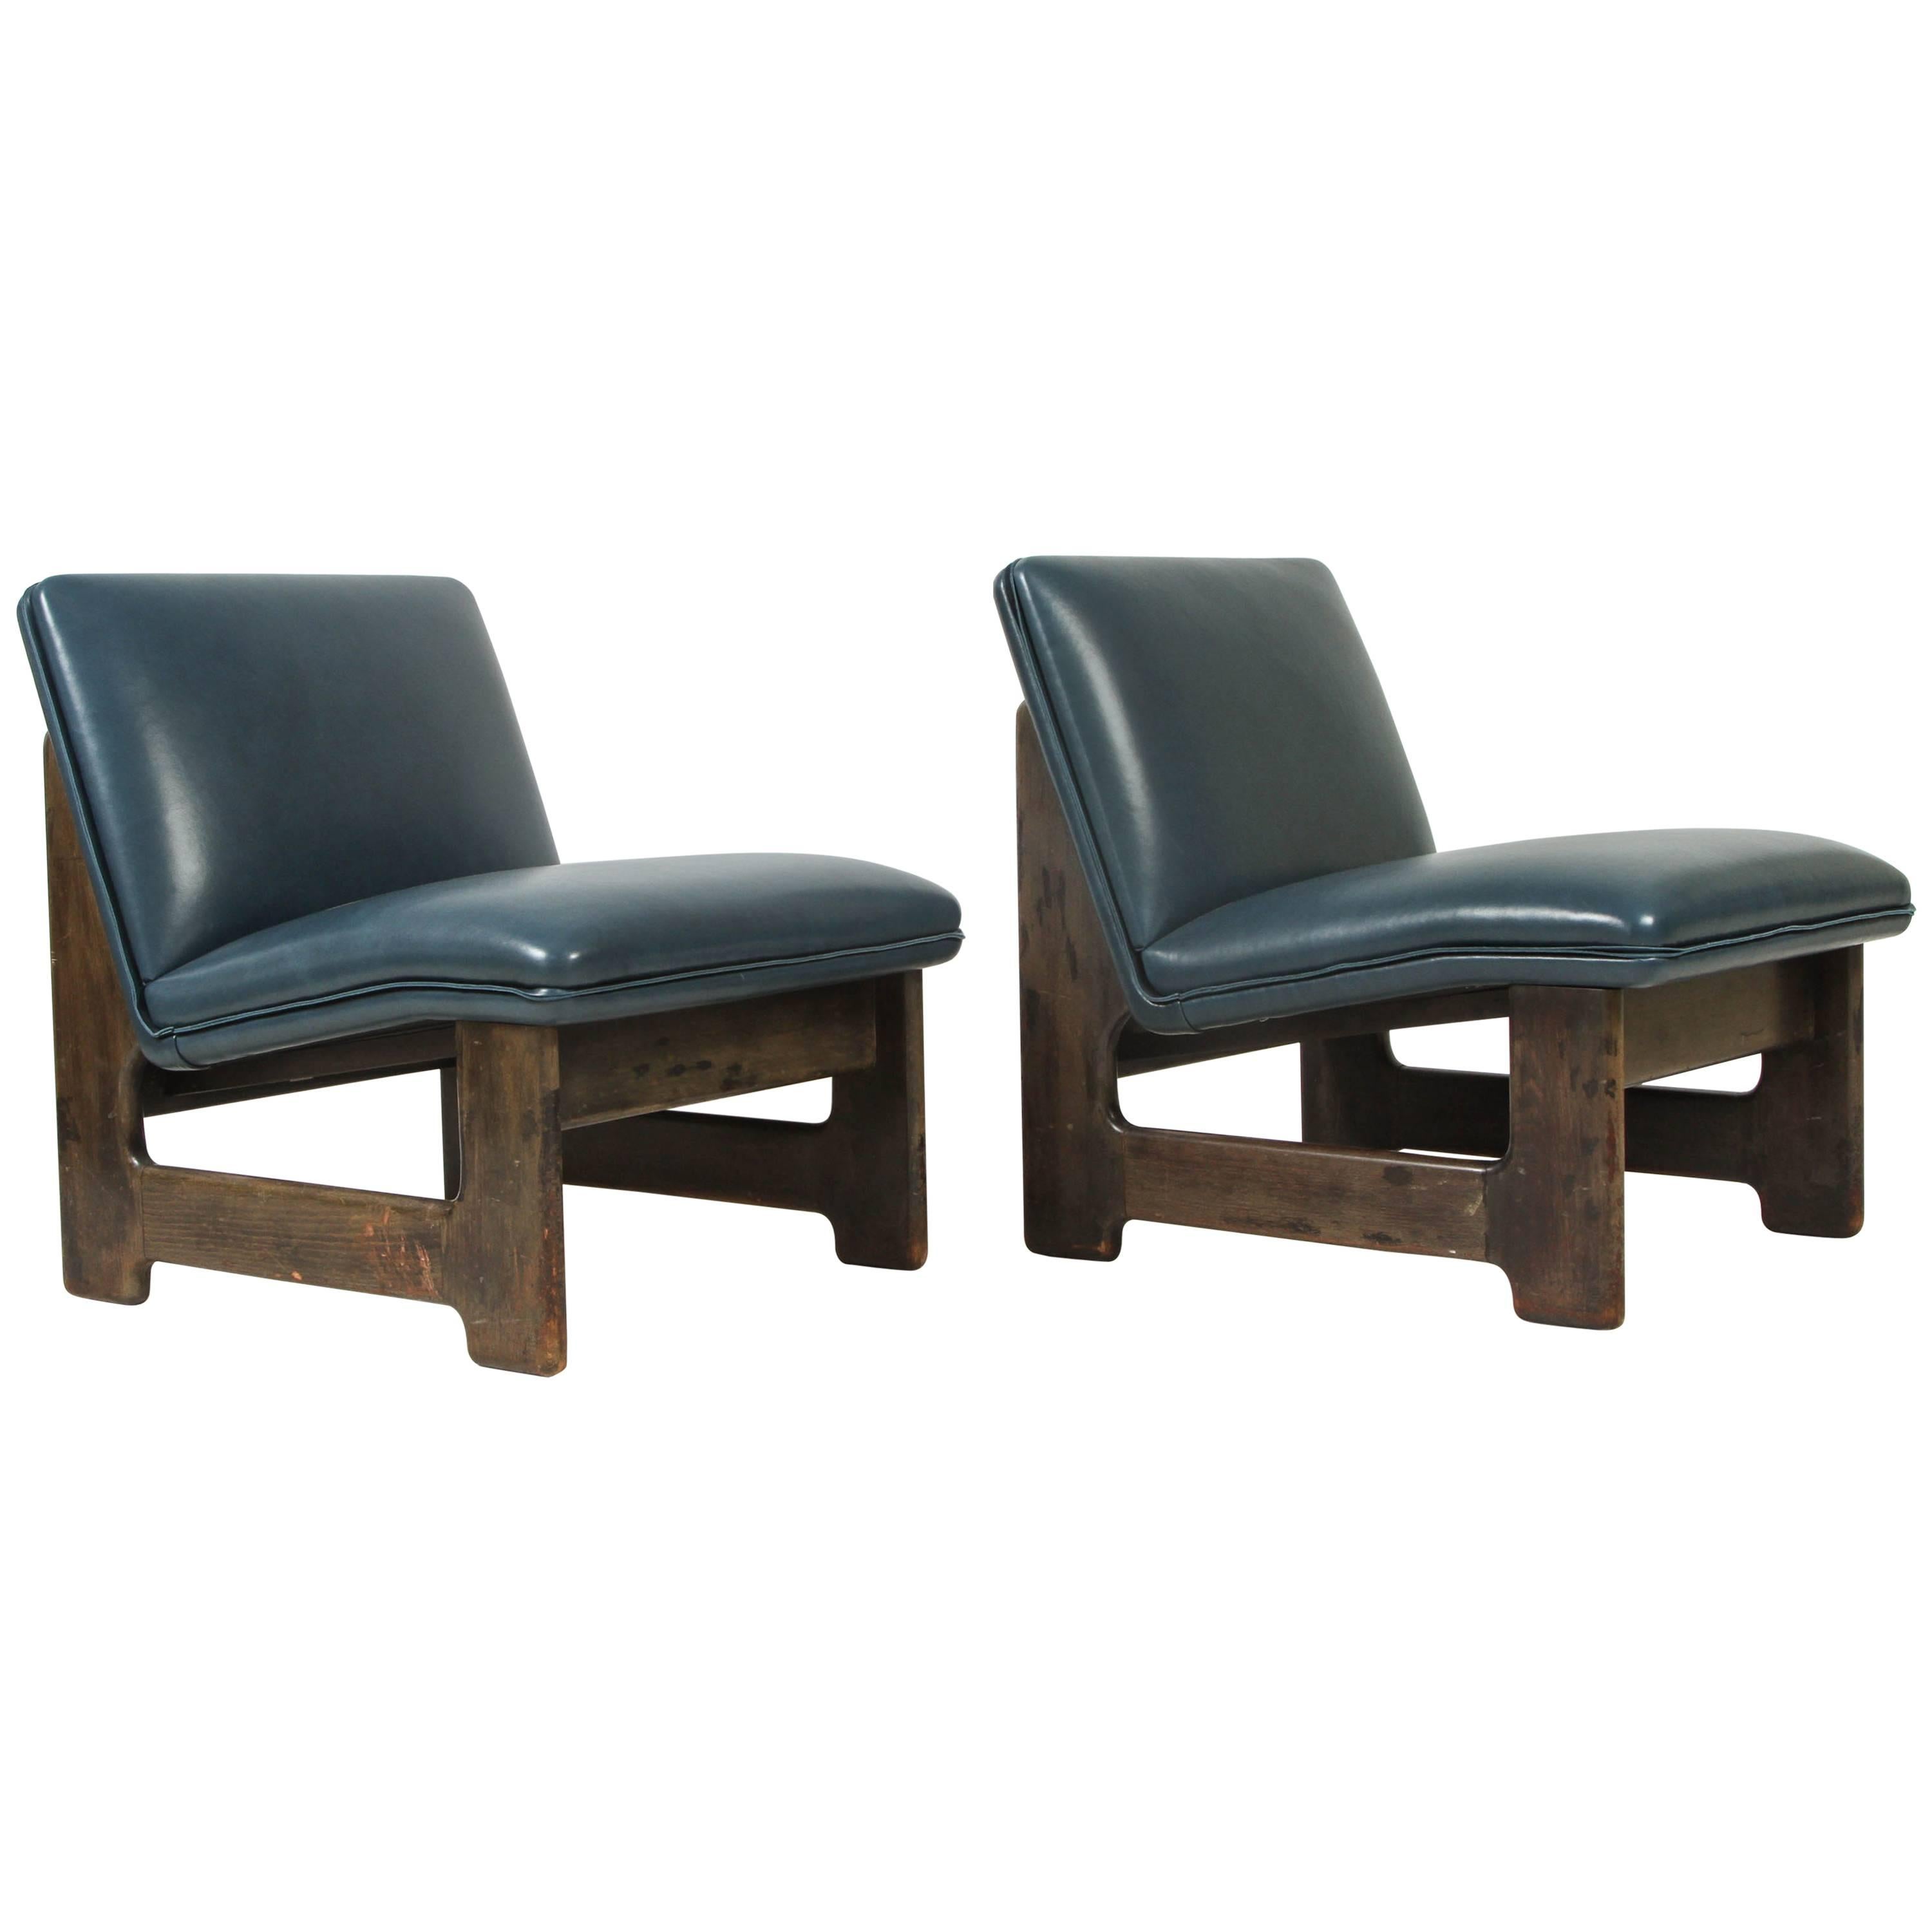 Pair of Italian Leather Club Chairs